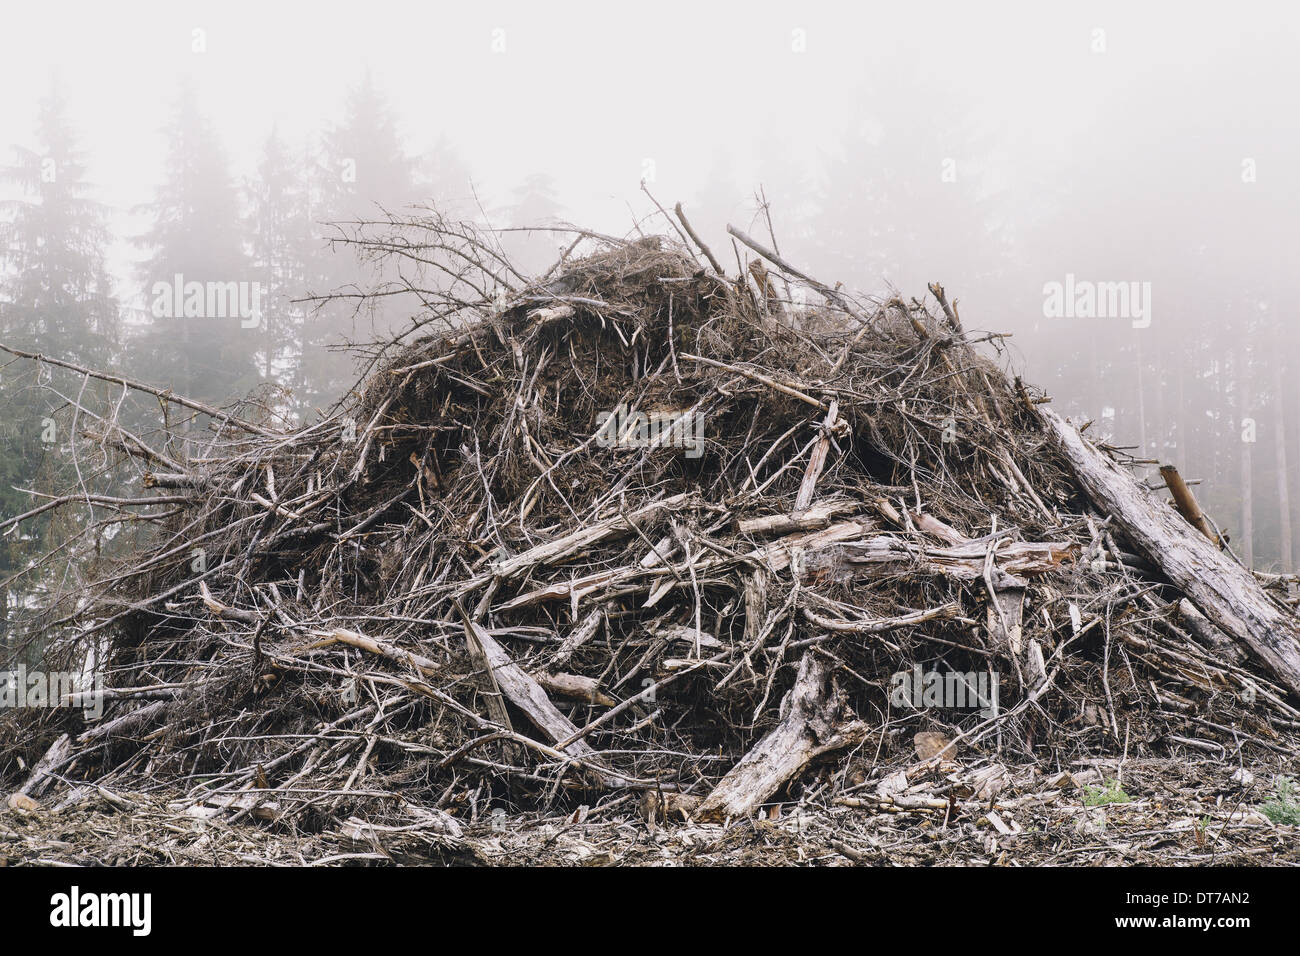 Pile of wood debris from clear cut logging Mist in the forest Calallam County Washington USA USA Stock Photo